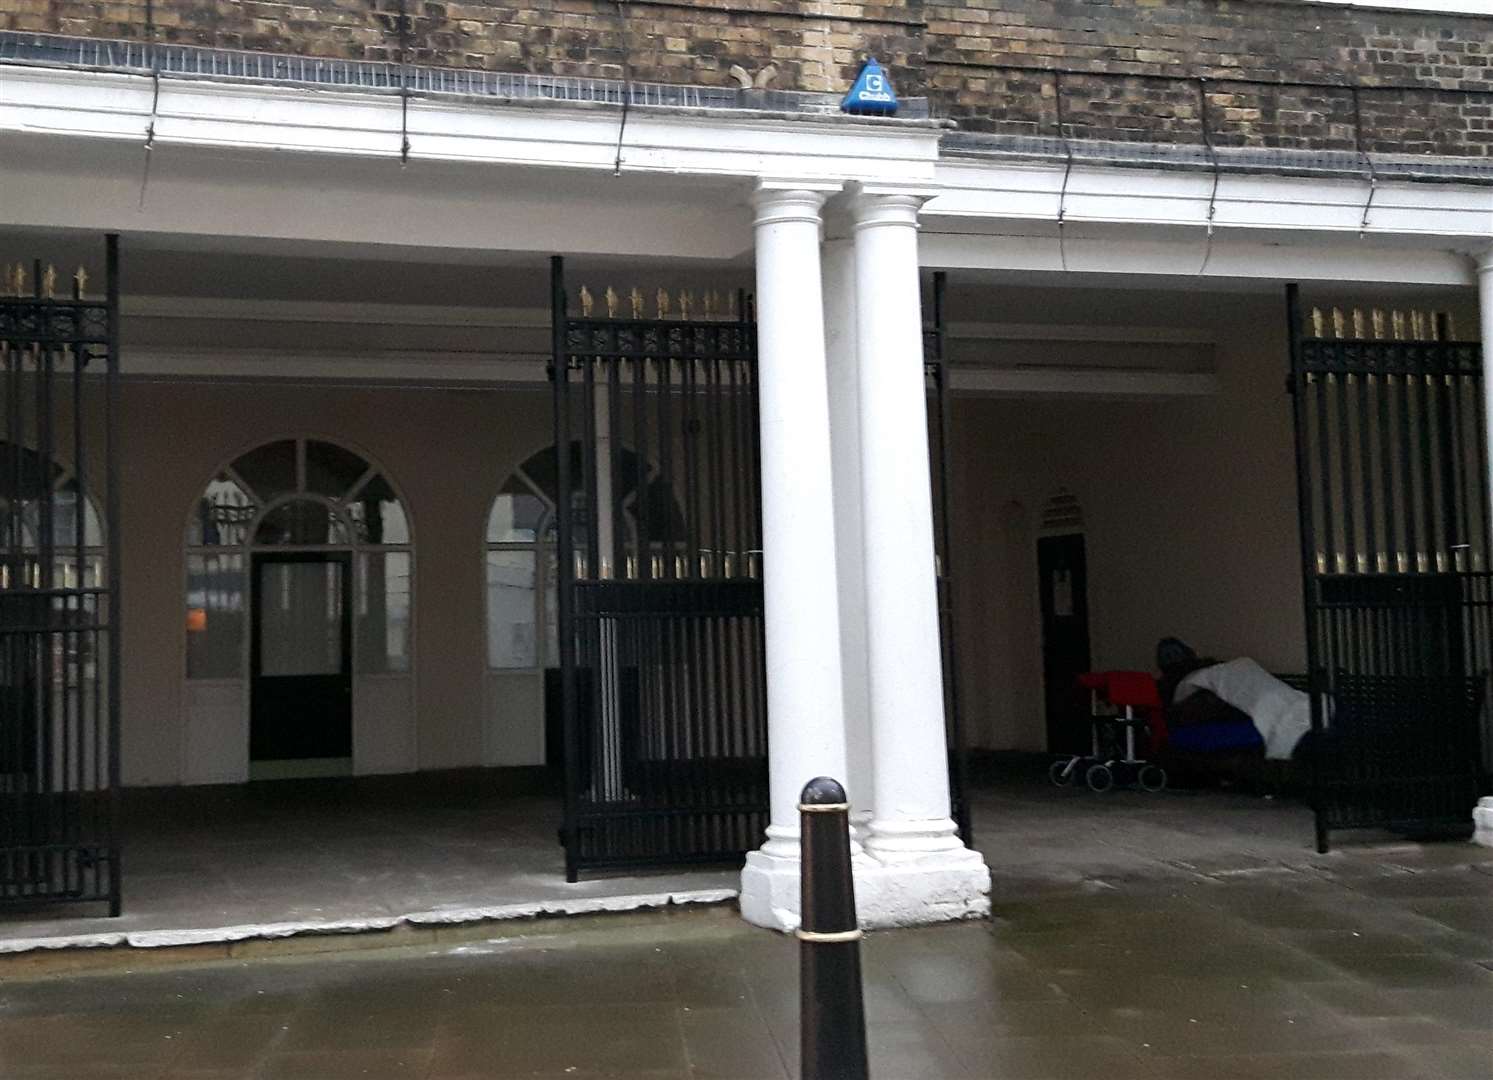 Some feel the new railings are taking away shelter from the homeless